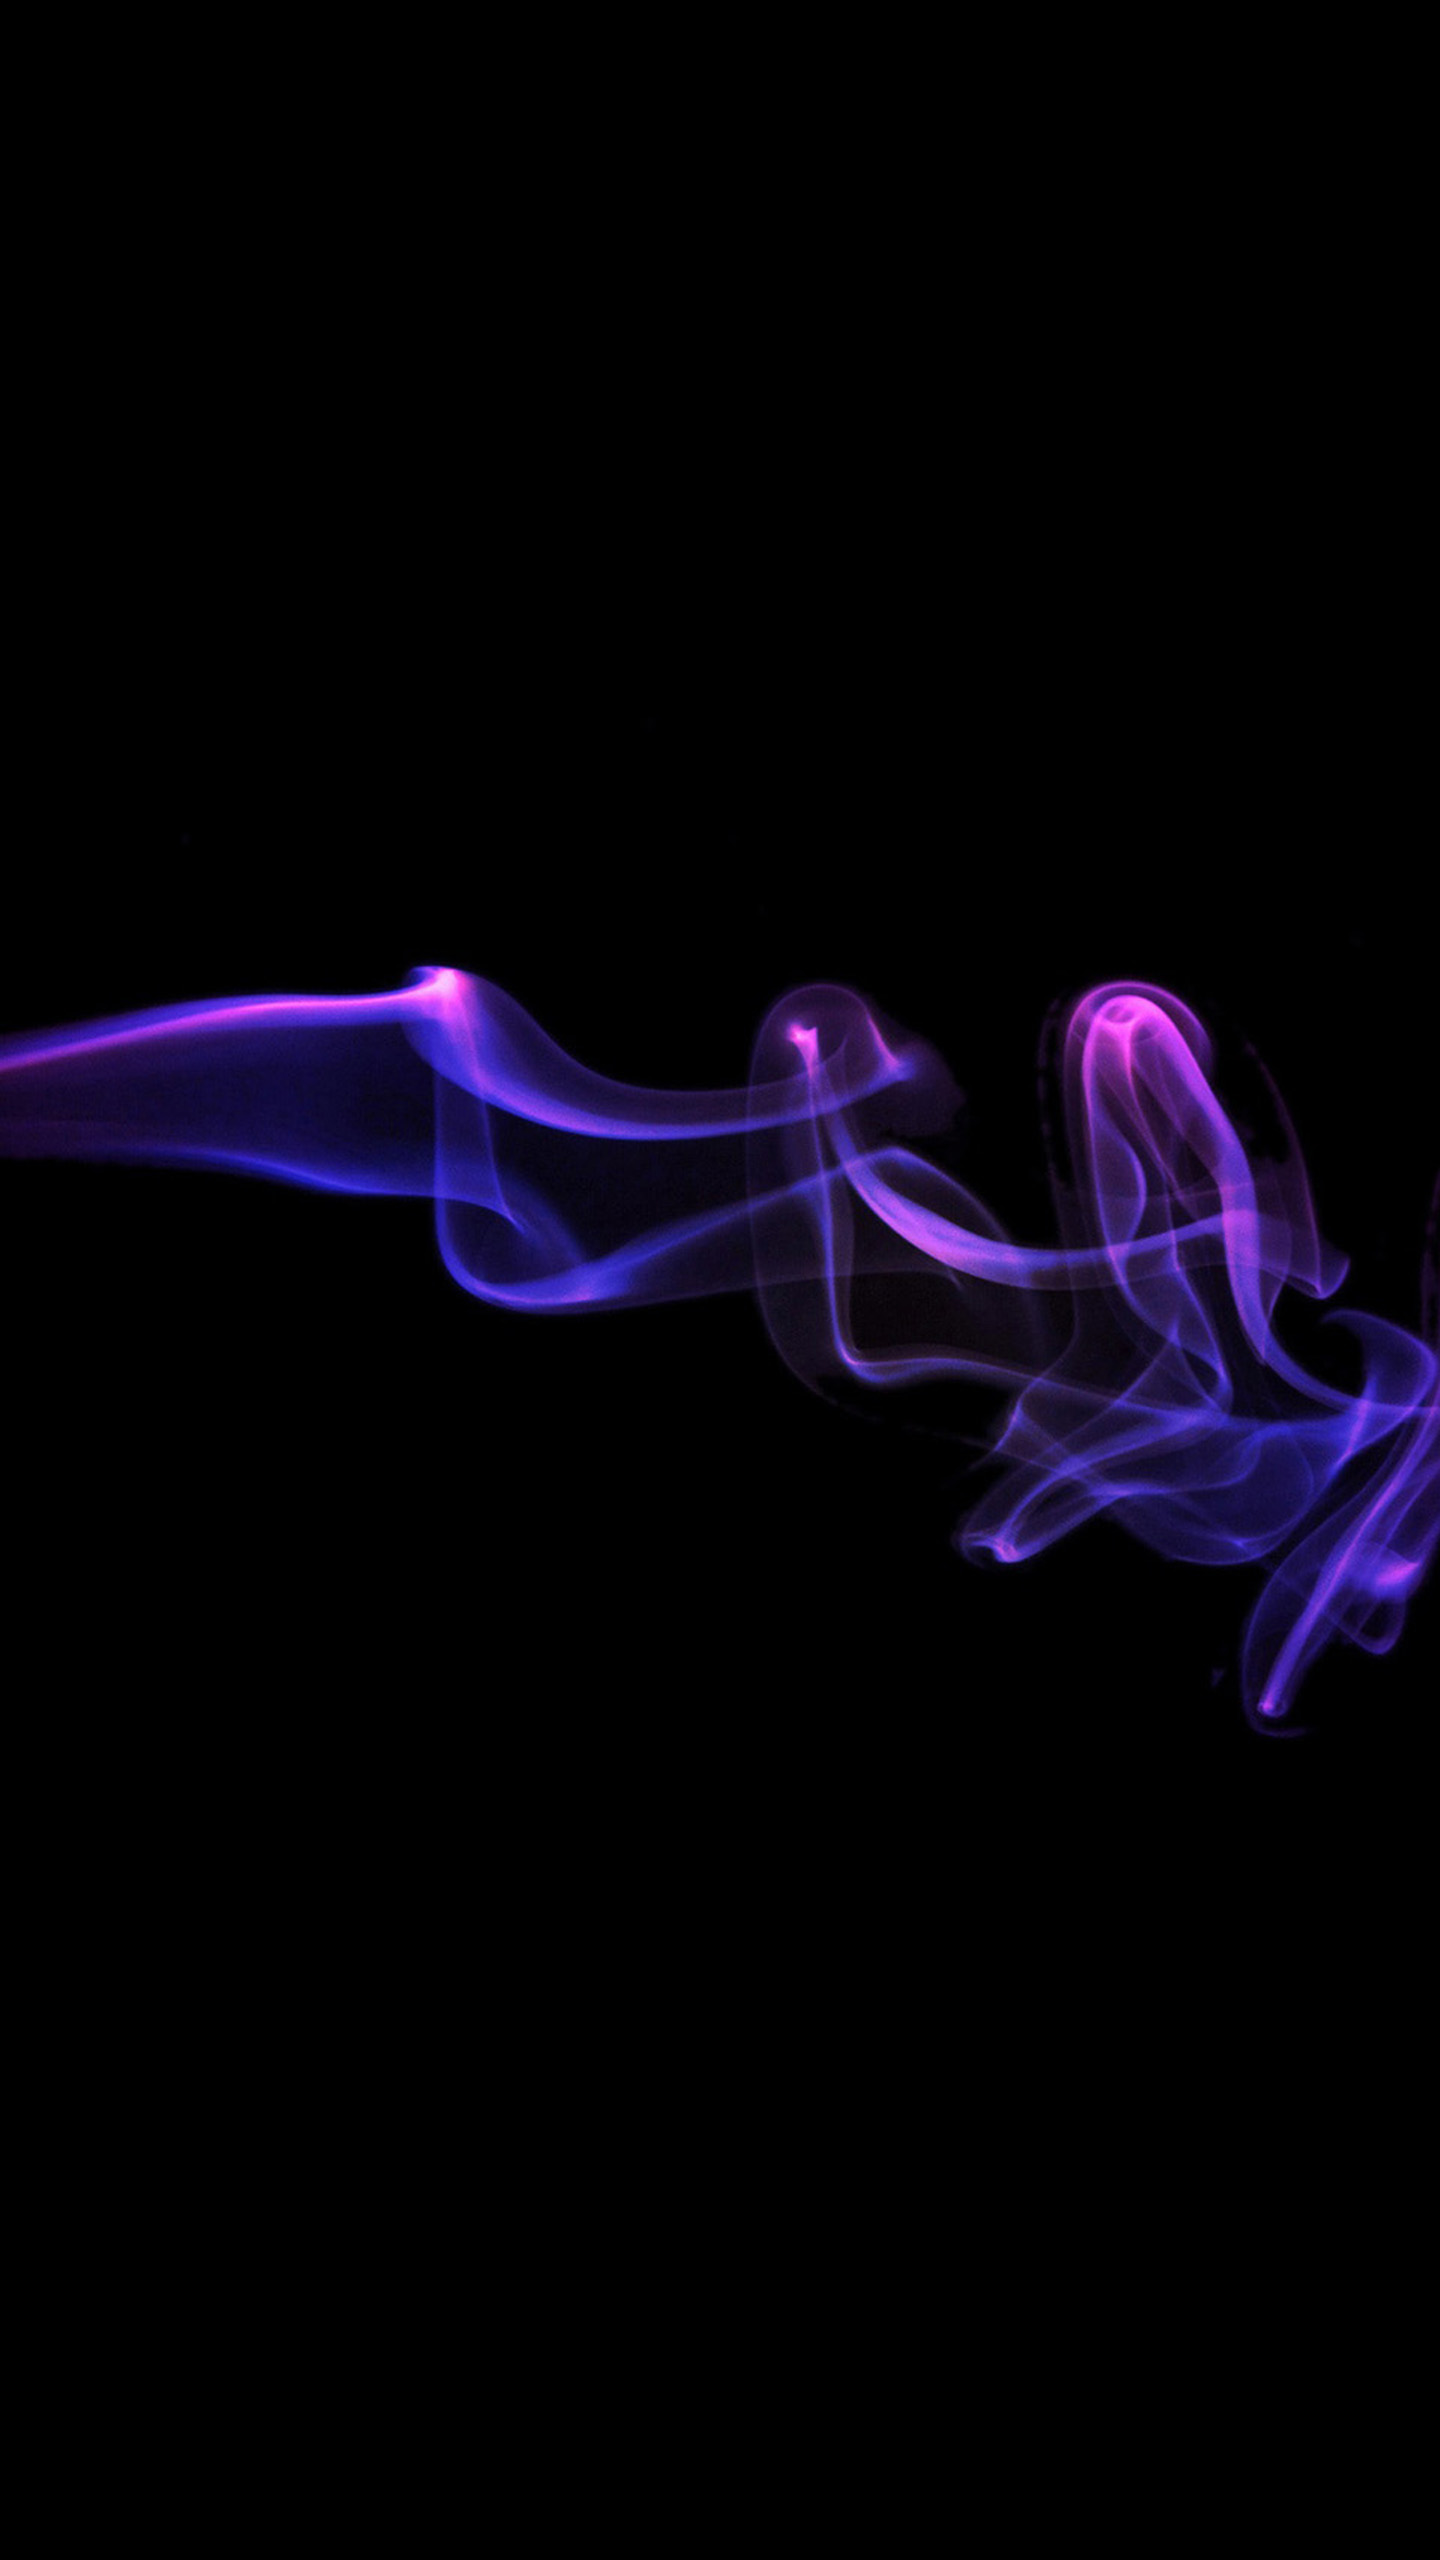 Abstract smoke 2 Galaxy S8 Wallpapers | Galaxy S8 Wallpapers